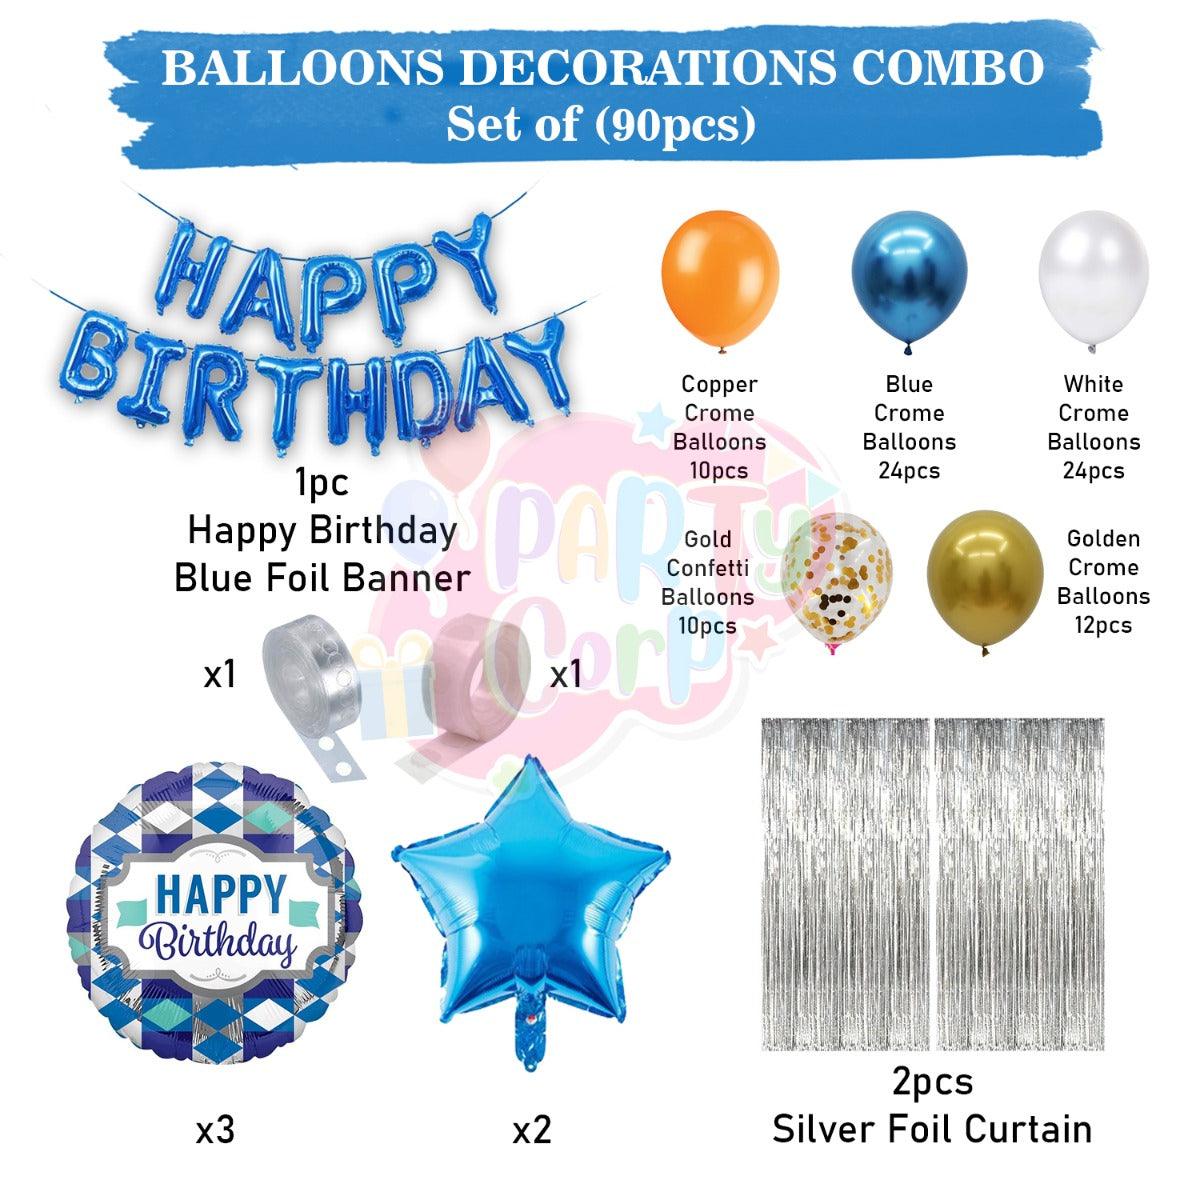 PartyCorp Happy Birthday Decoration Kit Combo 90 Pcs - Gold, Blue, White, Copper Chrome & Confetti Balloons, Blue Happy Birthday Banner, Silver Curtain, Blue Star & White Diamond Balloons